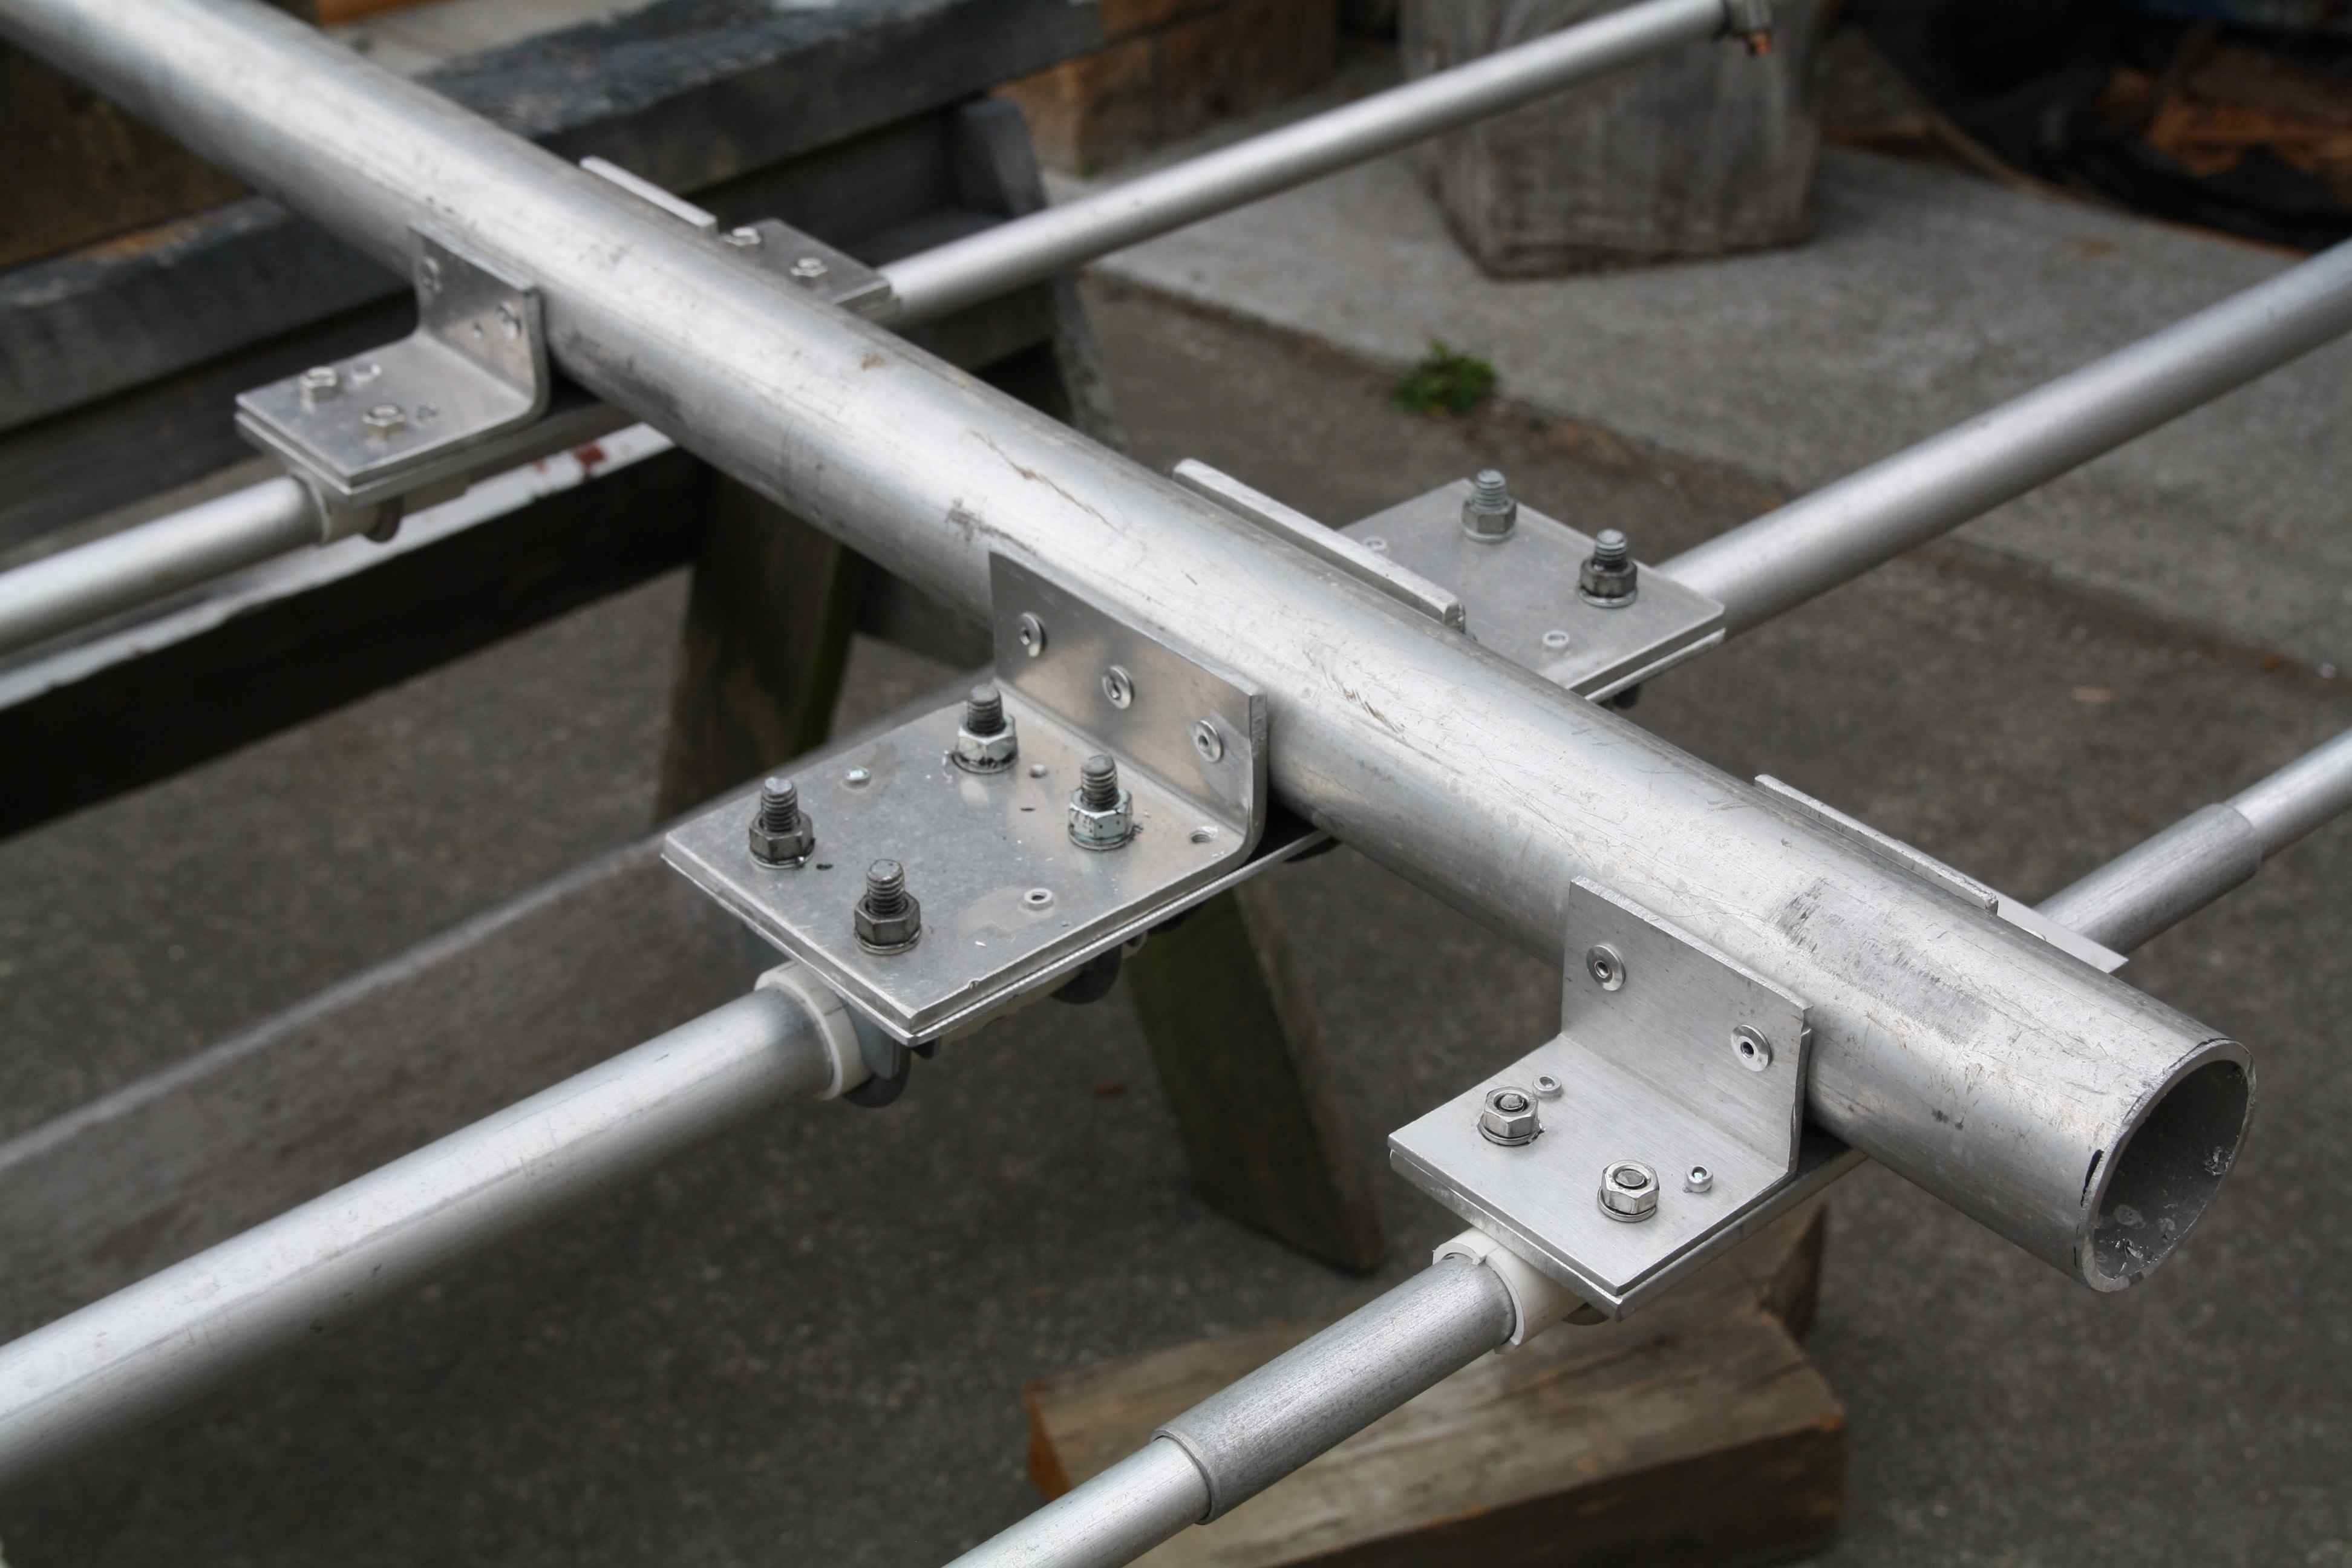 10M, 20M and 15M Clamp Assemblies with insulated elements